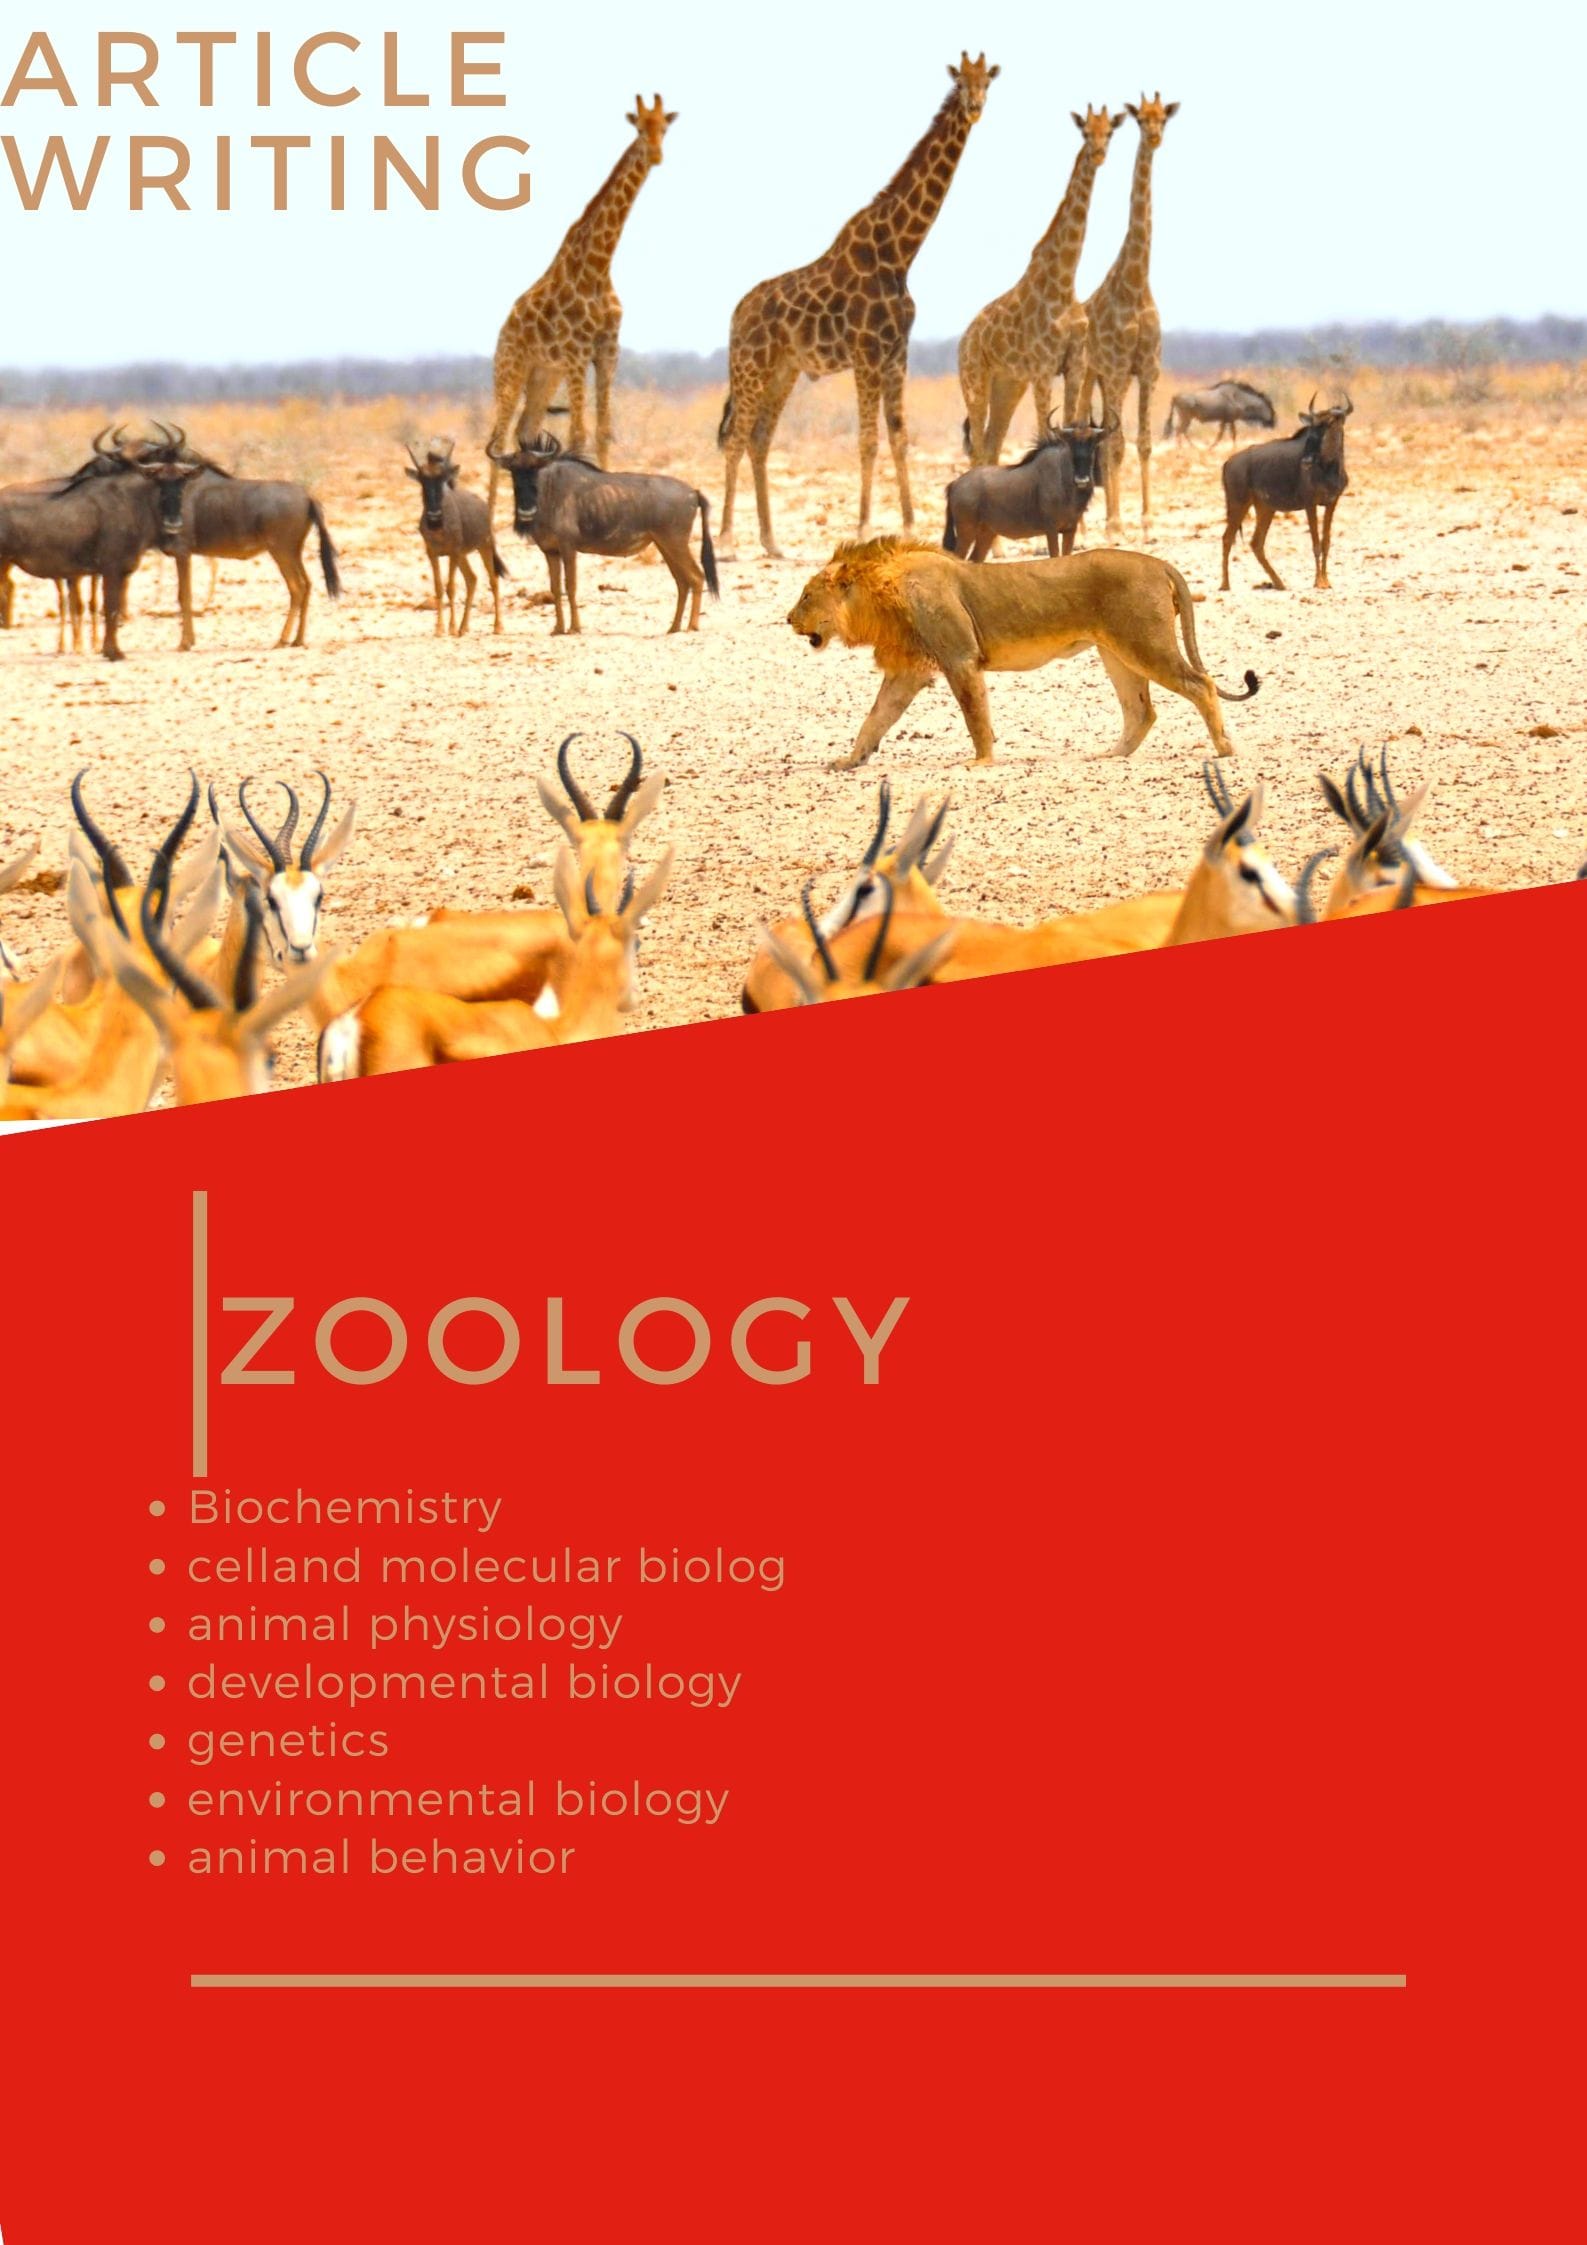 Write on any topic related to zoology by Ansazanib | Fiverr